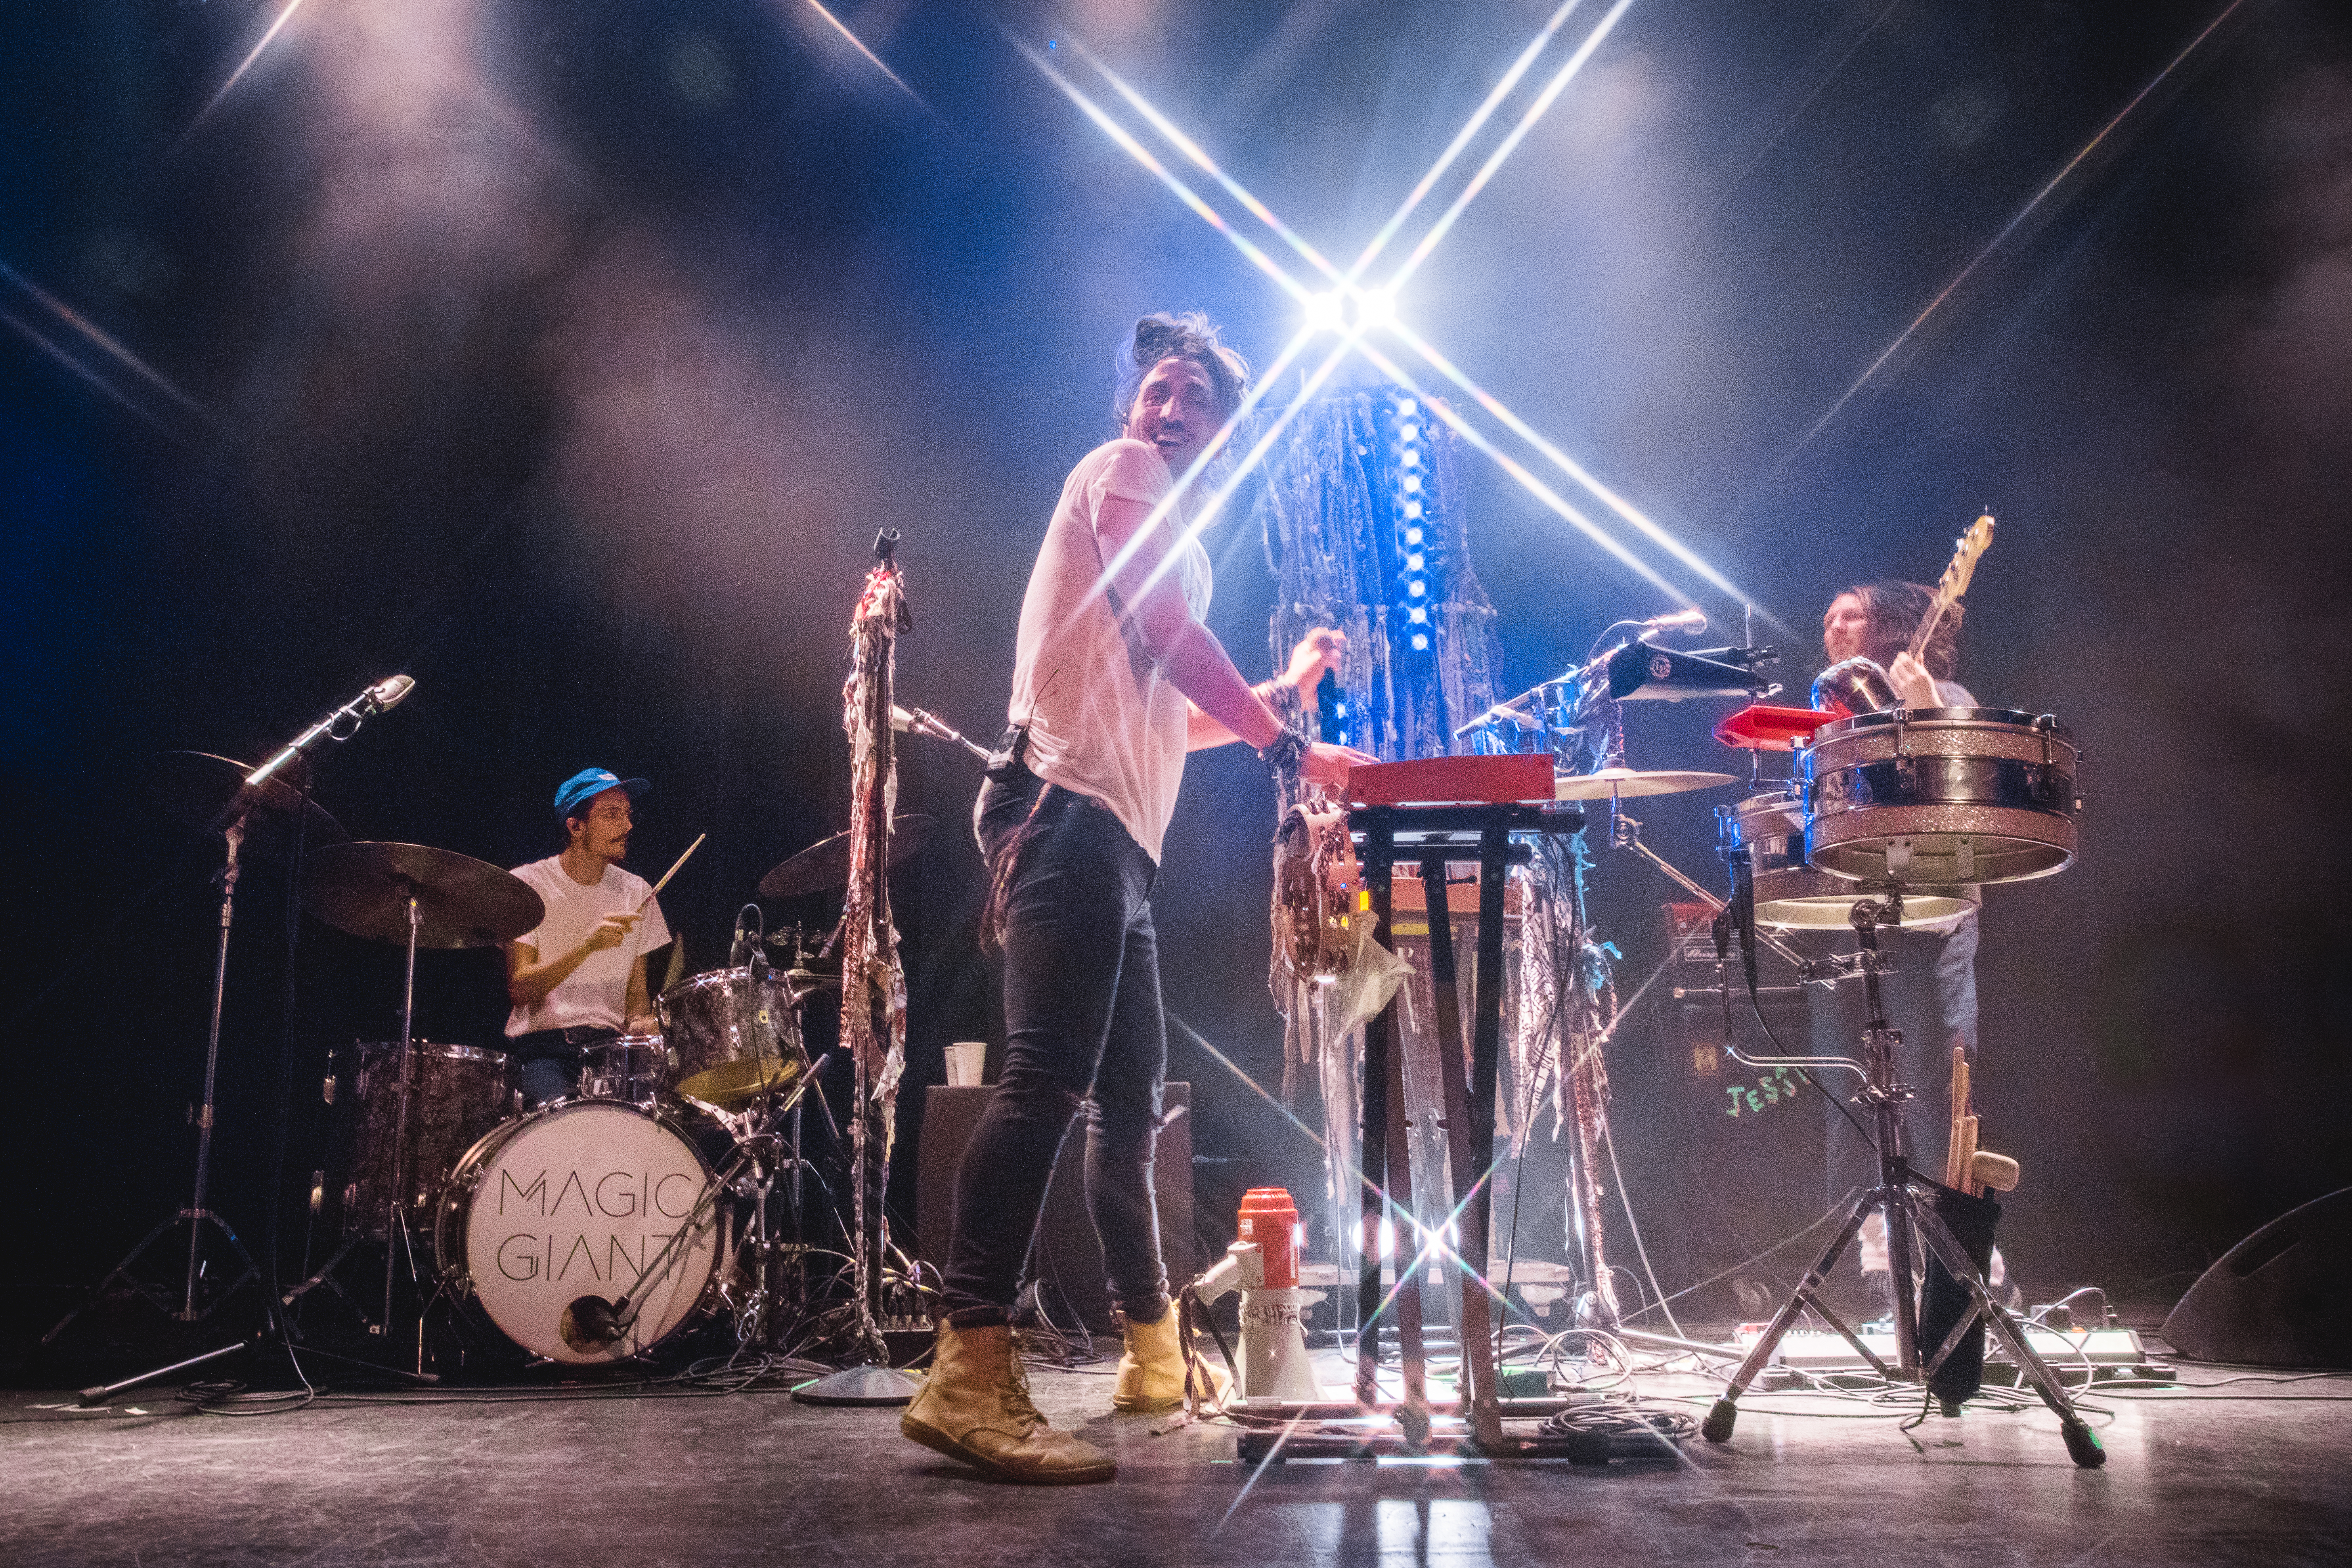 REVIEW: All the good vibes from Magic Giant